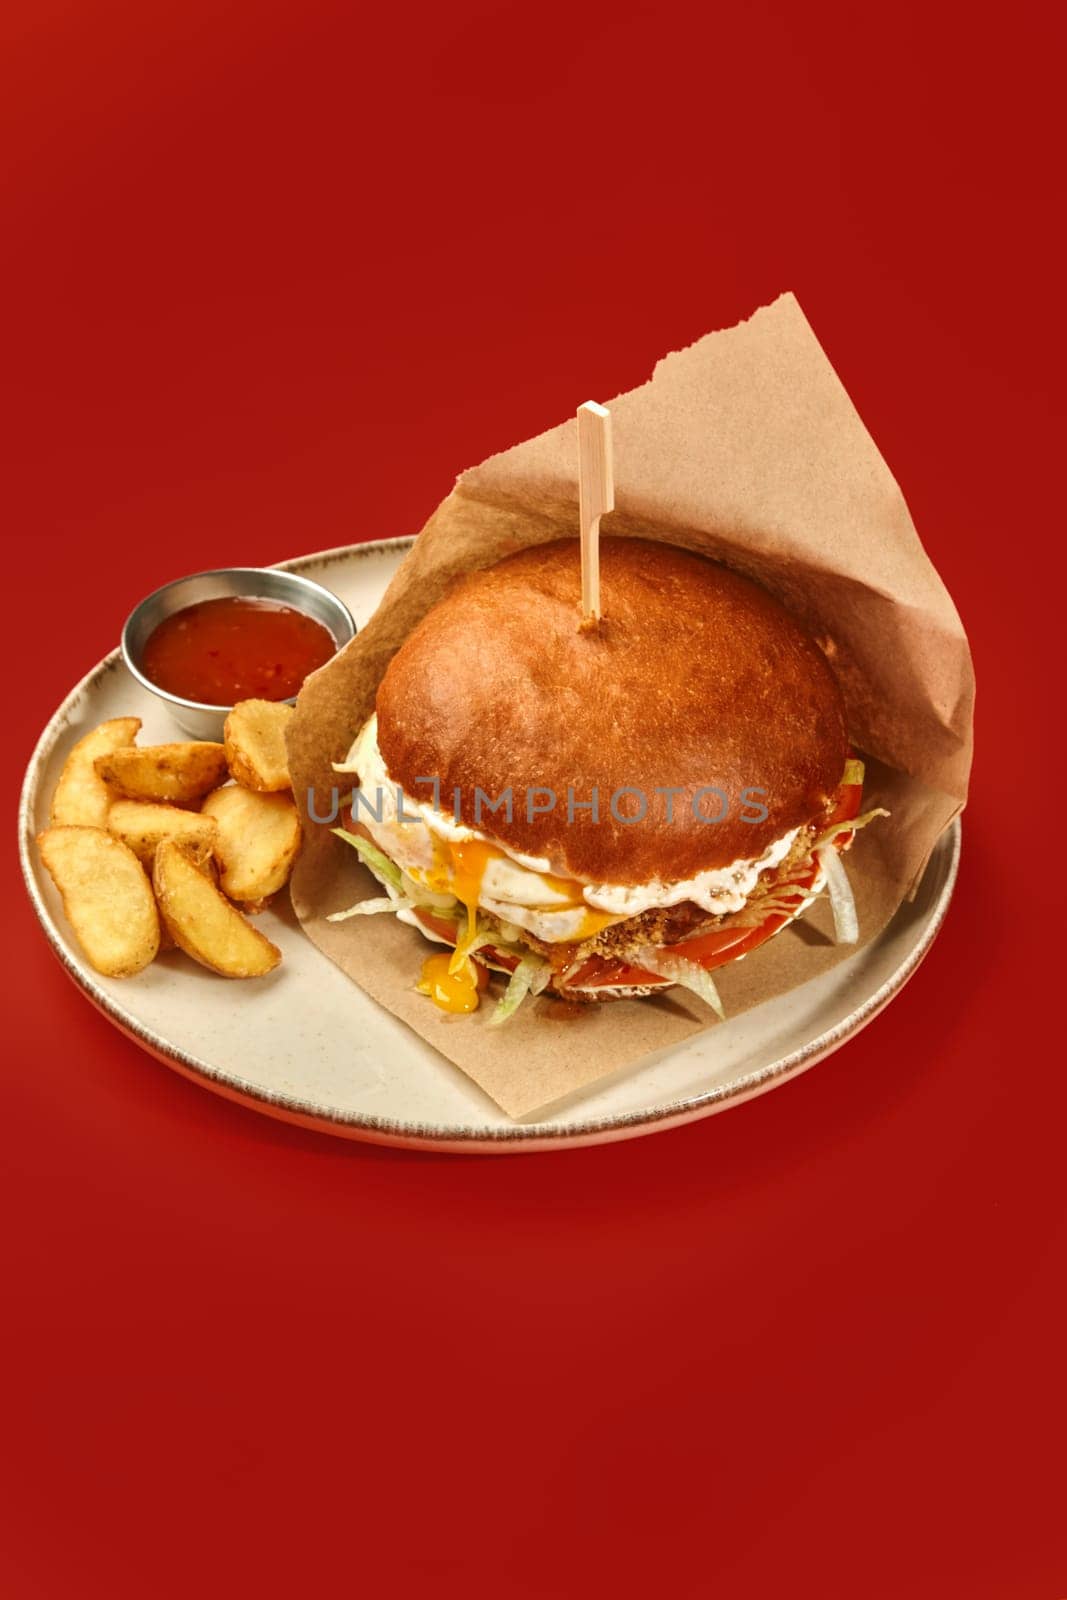 Craft-style chicken burger with fried egg and vegetables in brown paper wrap with wooden skewer served with wedge fries and dipping sauce on plate, on red background. Popular fast food concept